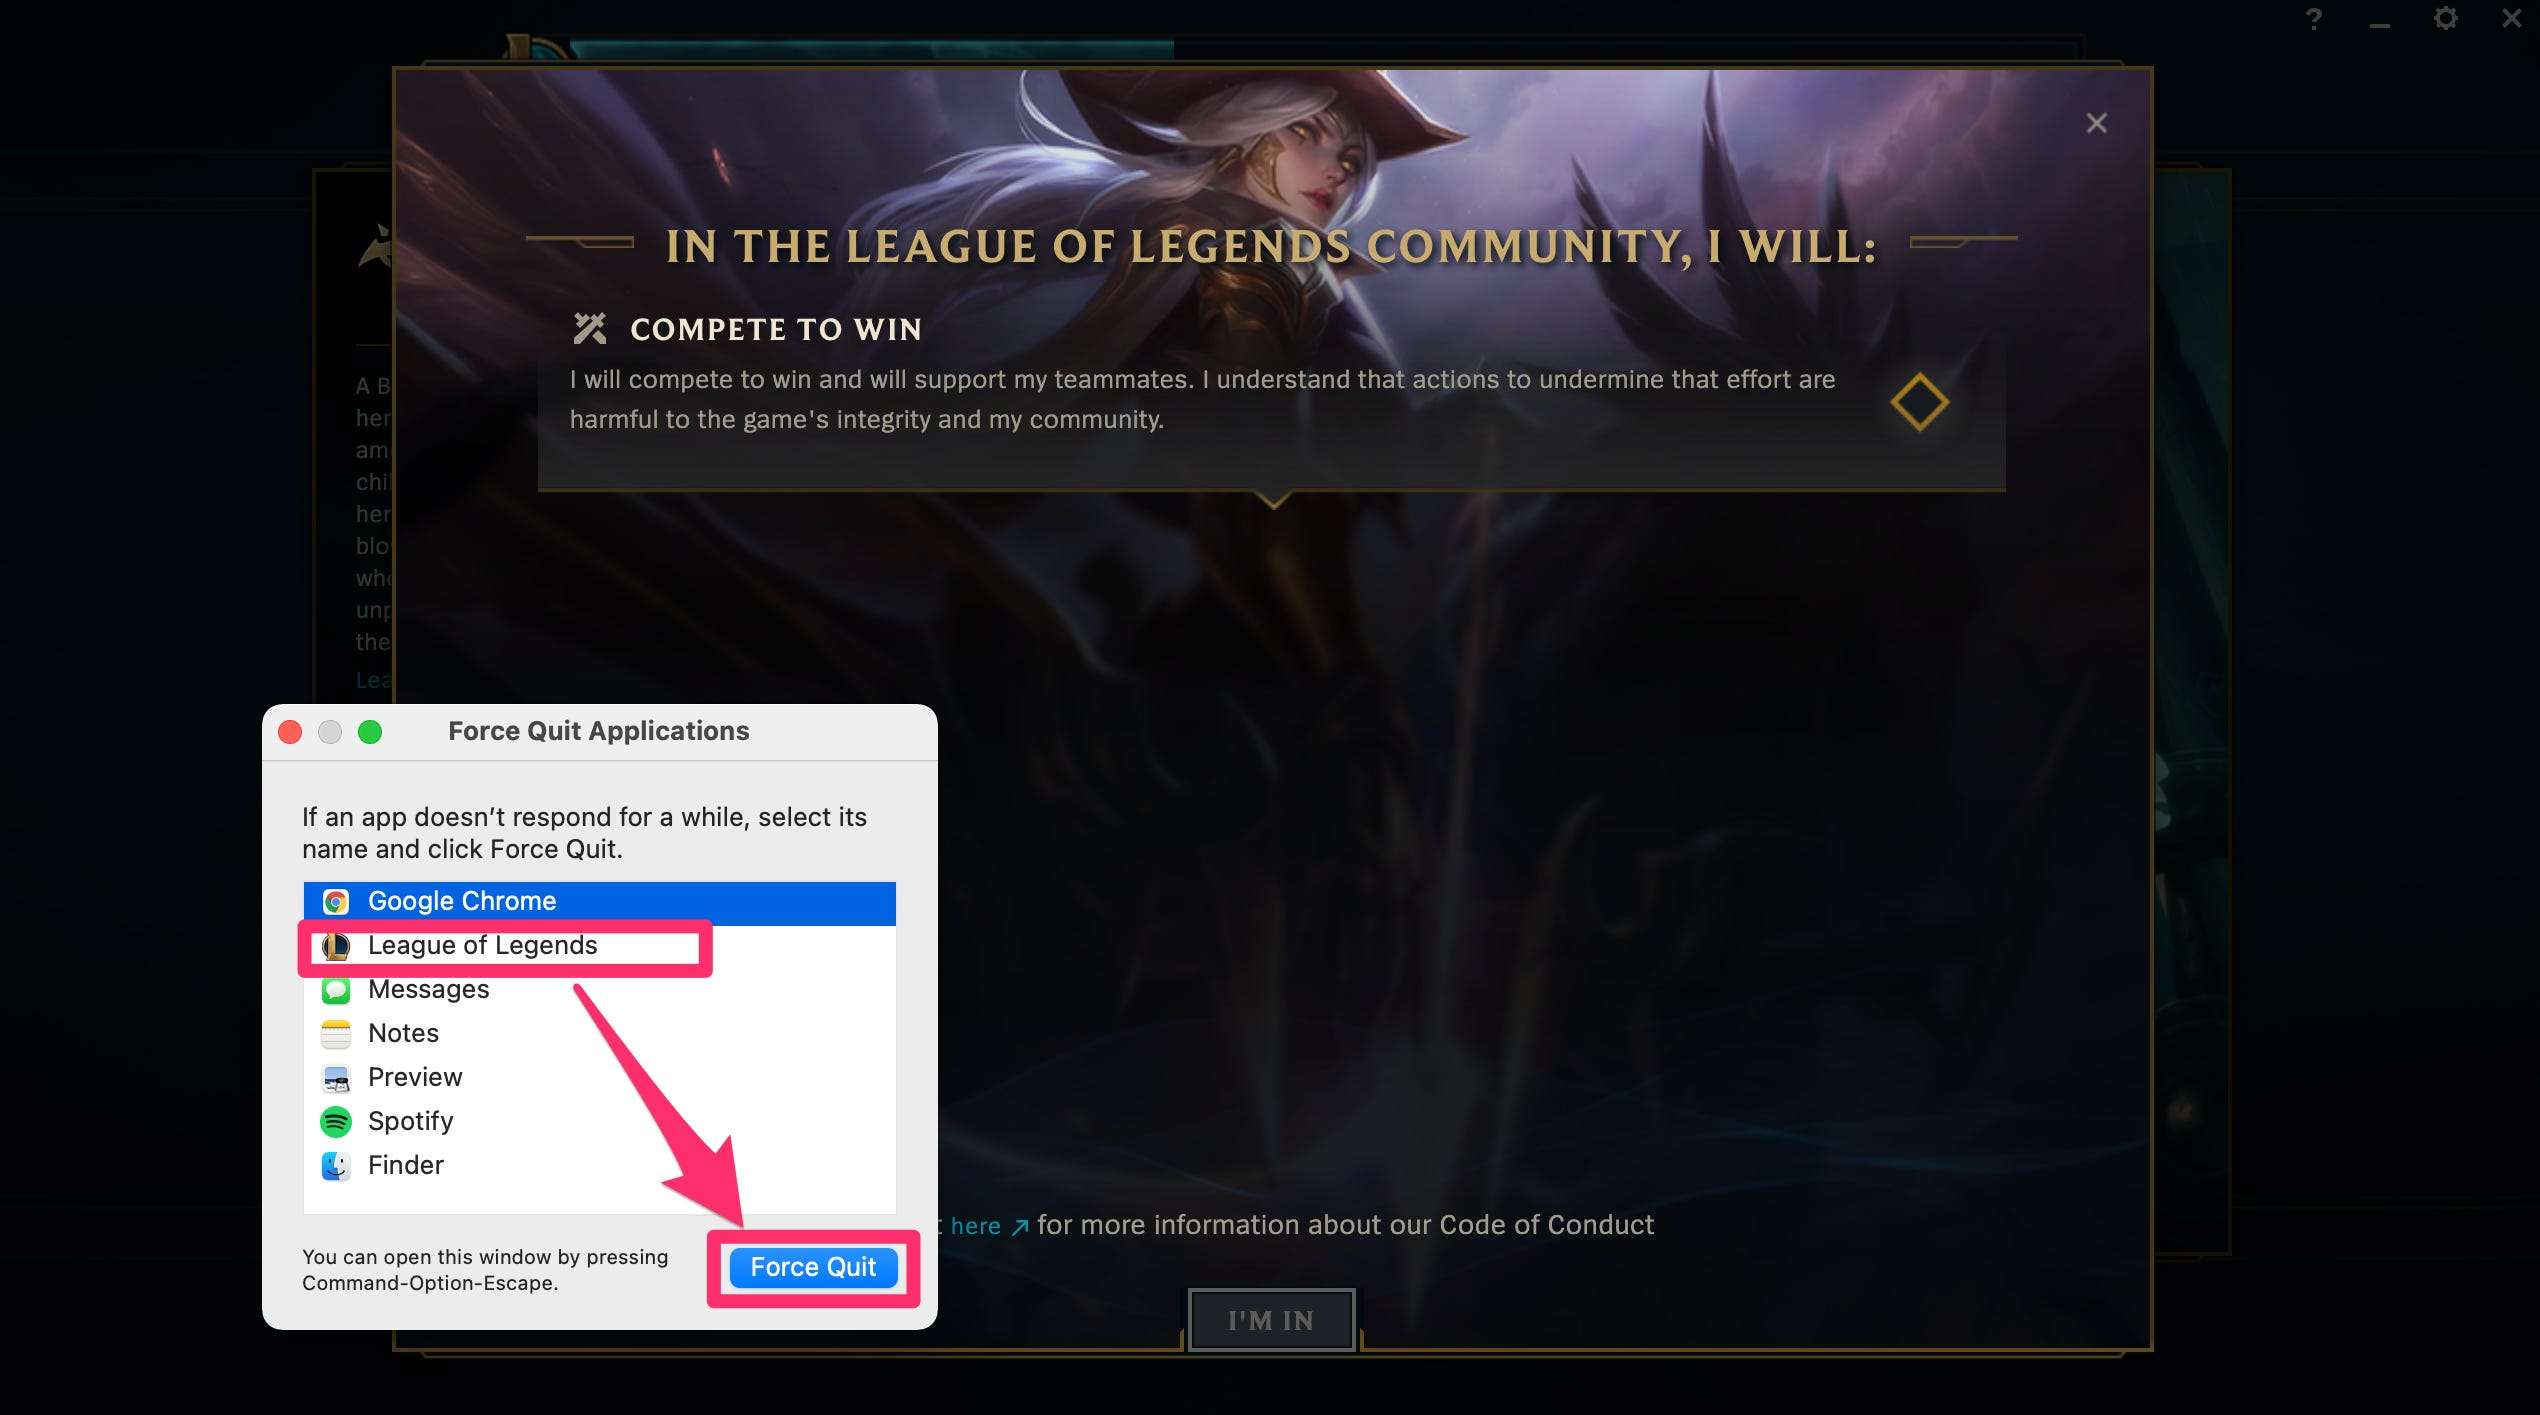 Visit the official website or social media accounts of League of Legends to check for any reported server issues.
Monitor your internet connection for any signs of network congestion or instability.